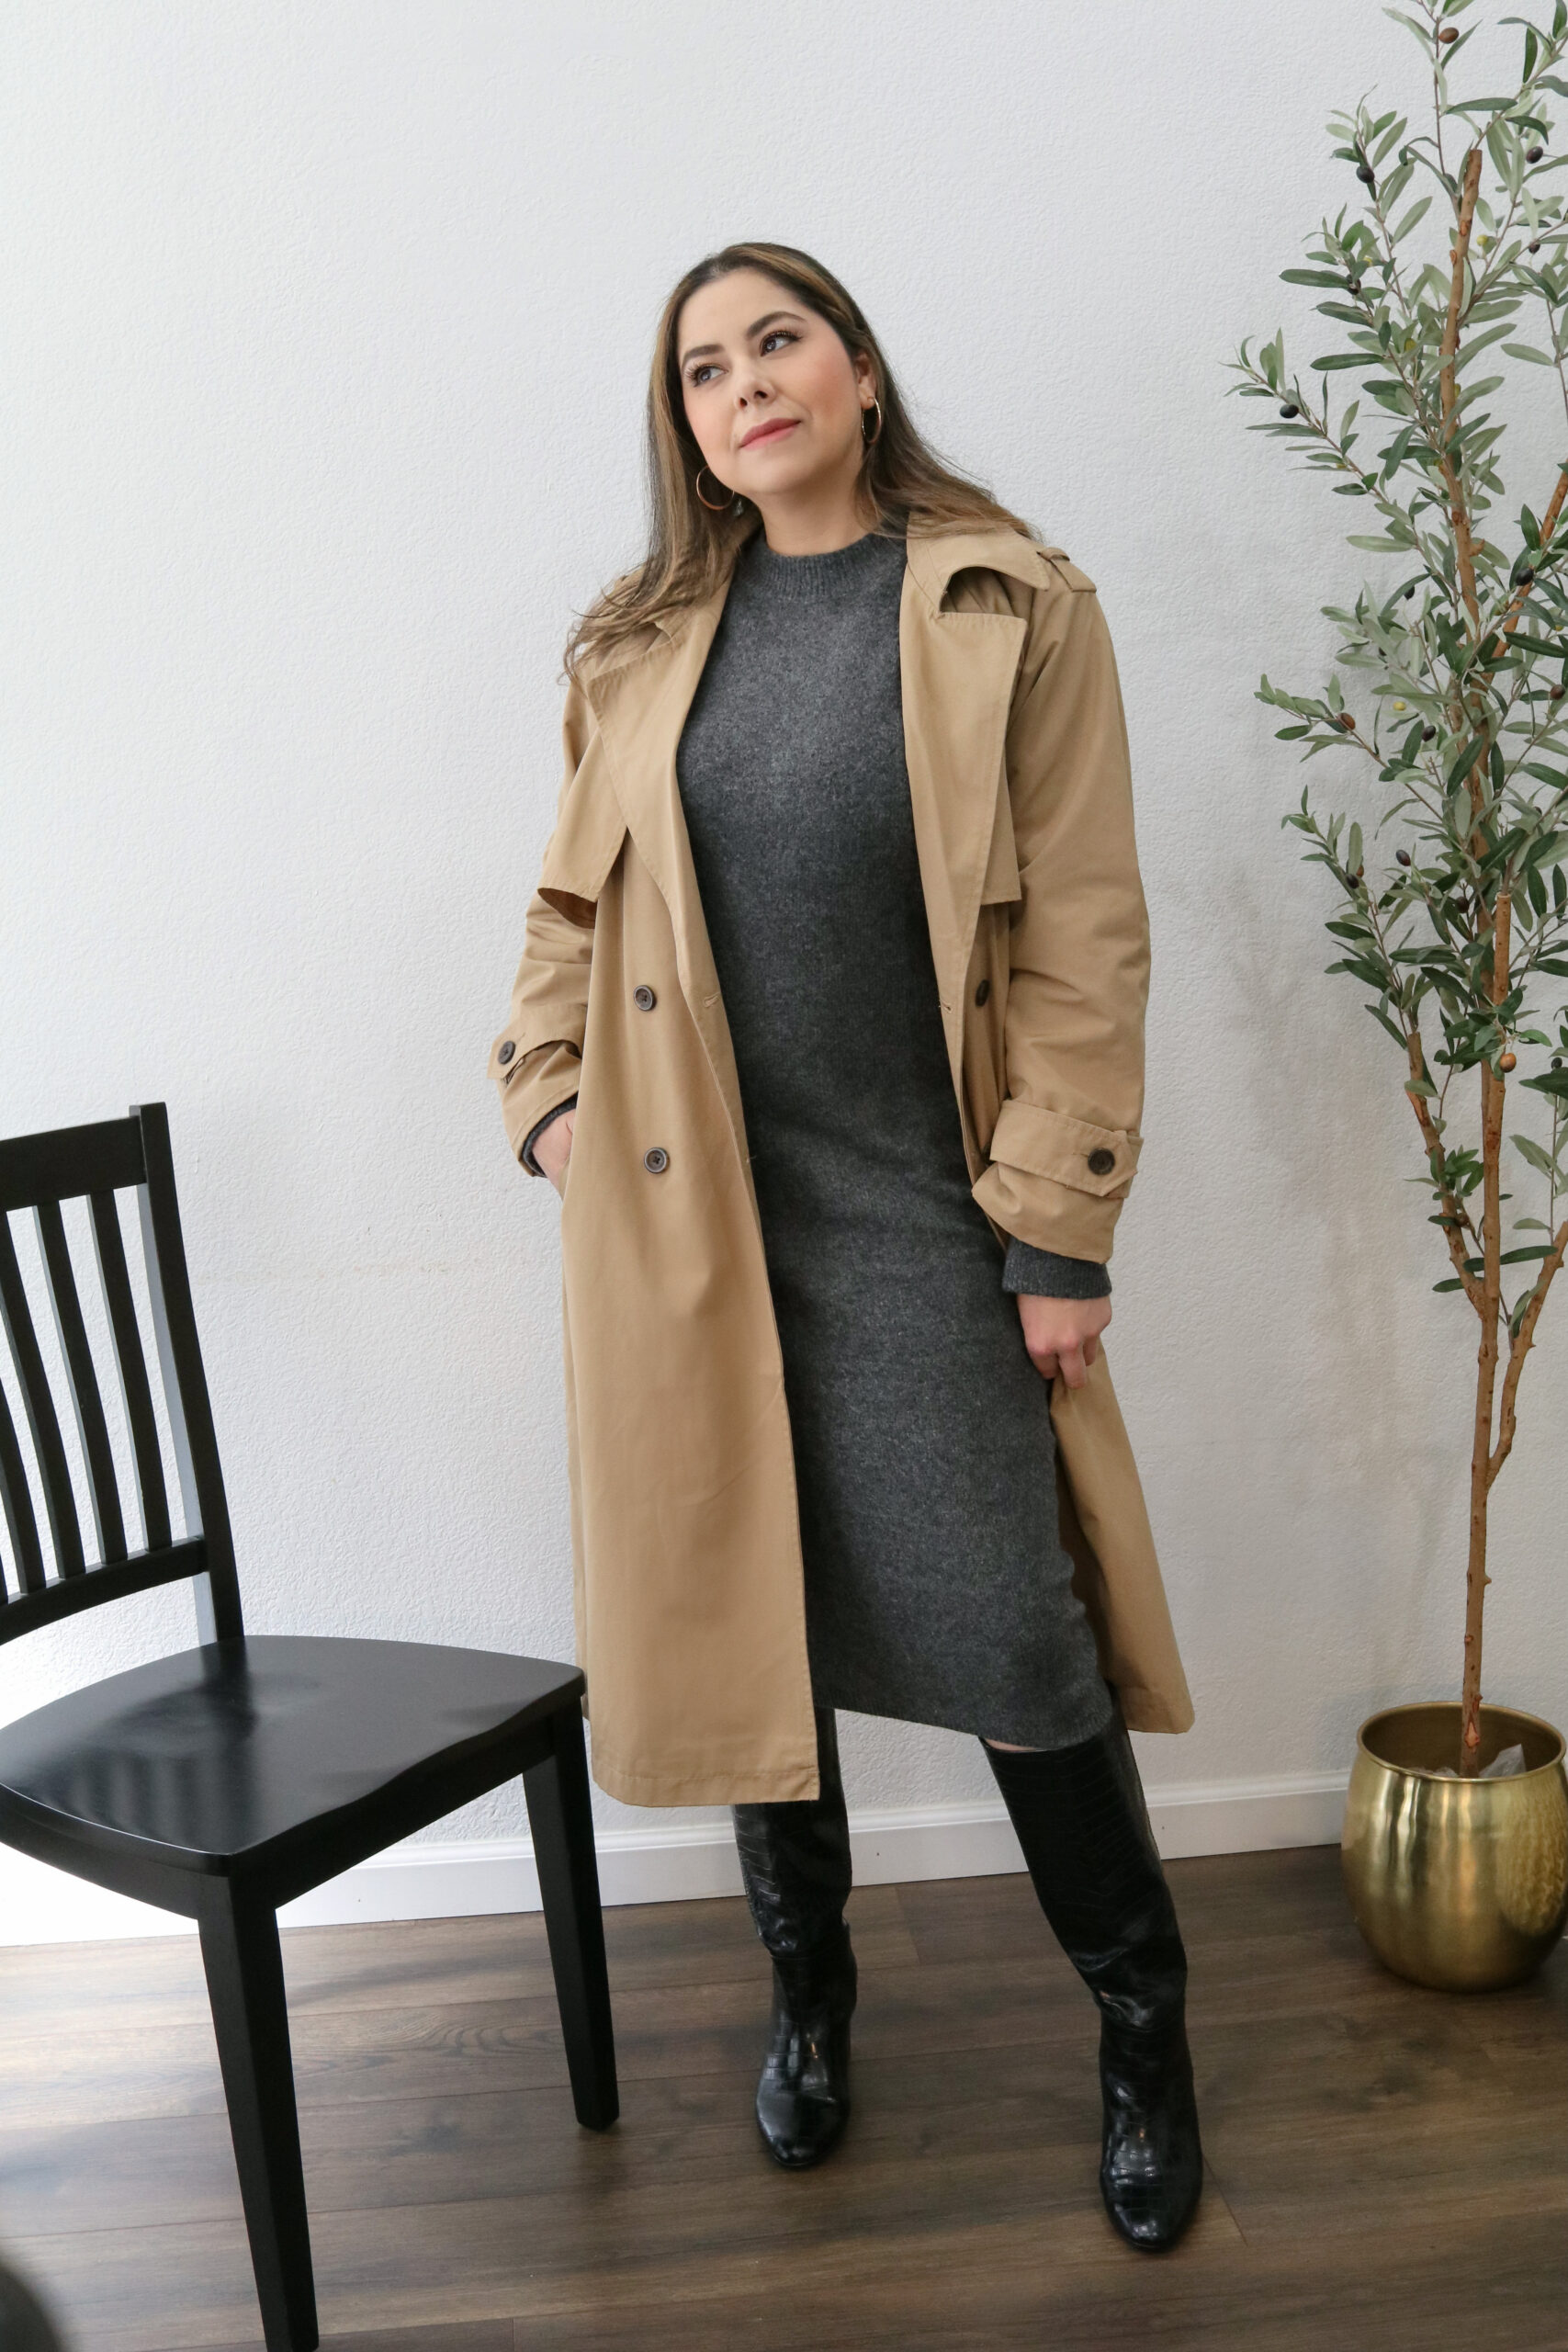 how to style a trench coat for work, chic workwear outfit, sweater midi dress and trench coat